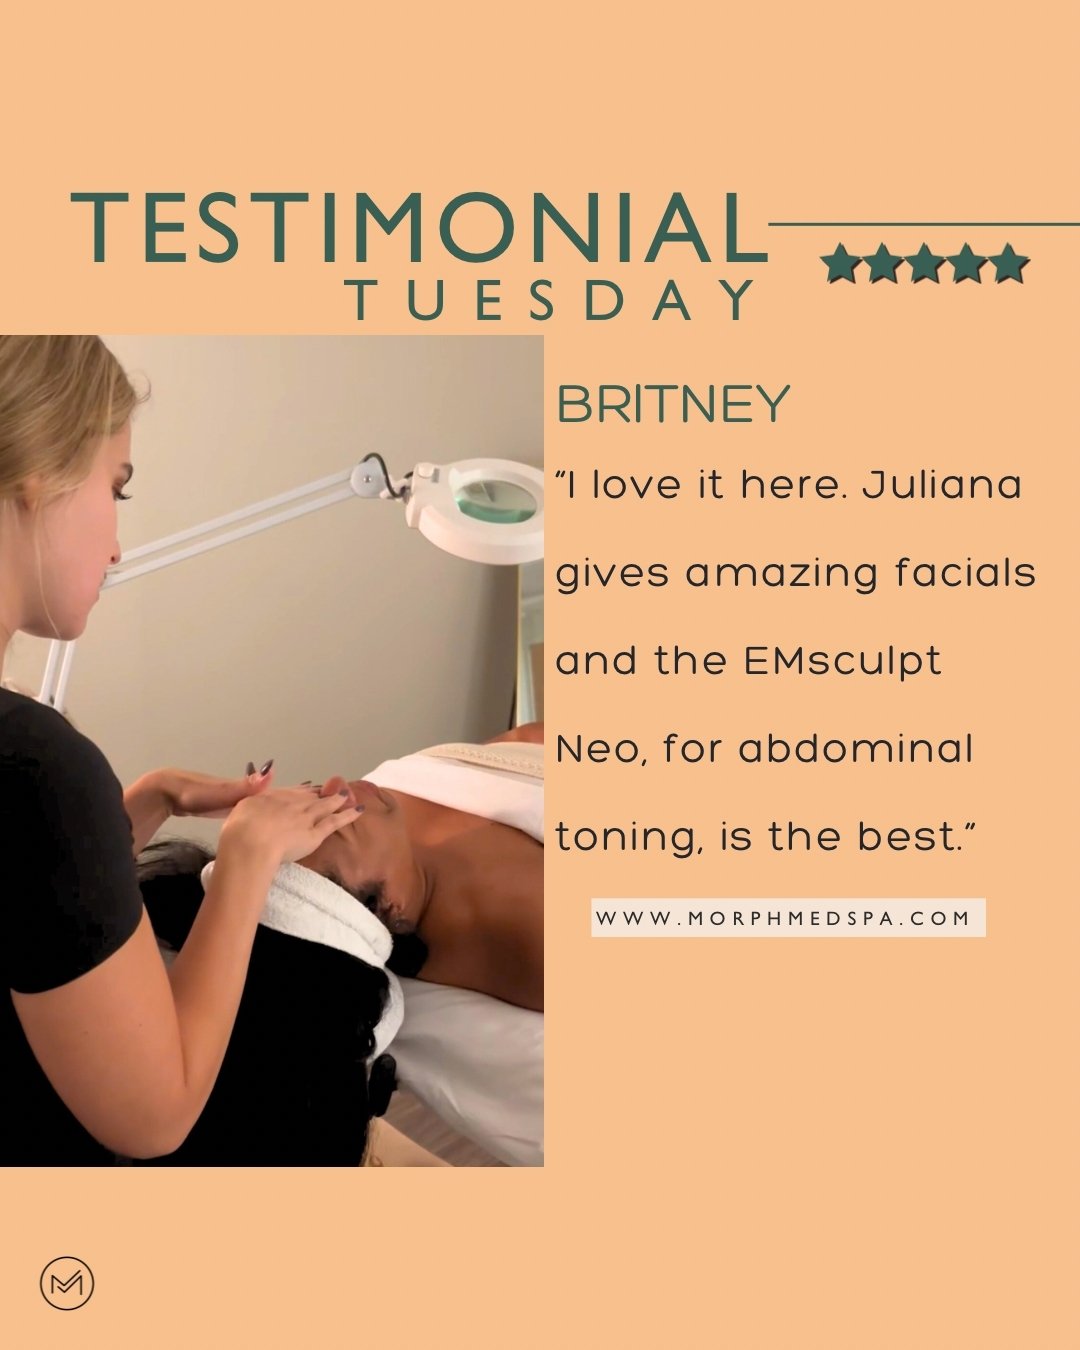 Whether it&rsquo;s a facial 💆or EMsculpt Neo 💪&hellip;

We strive to provide the ✨BEST✨ services that can improve your life. 

DM us if you&rsquo;re ready to choose the best treatment plan for you. 

.
.
.

 #evidencebasedmedicine #personalizedmedi